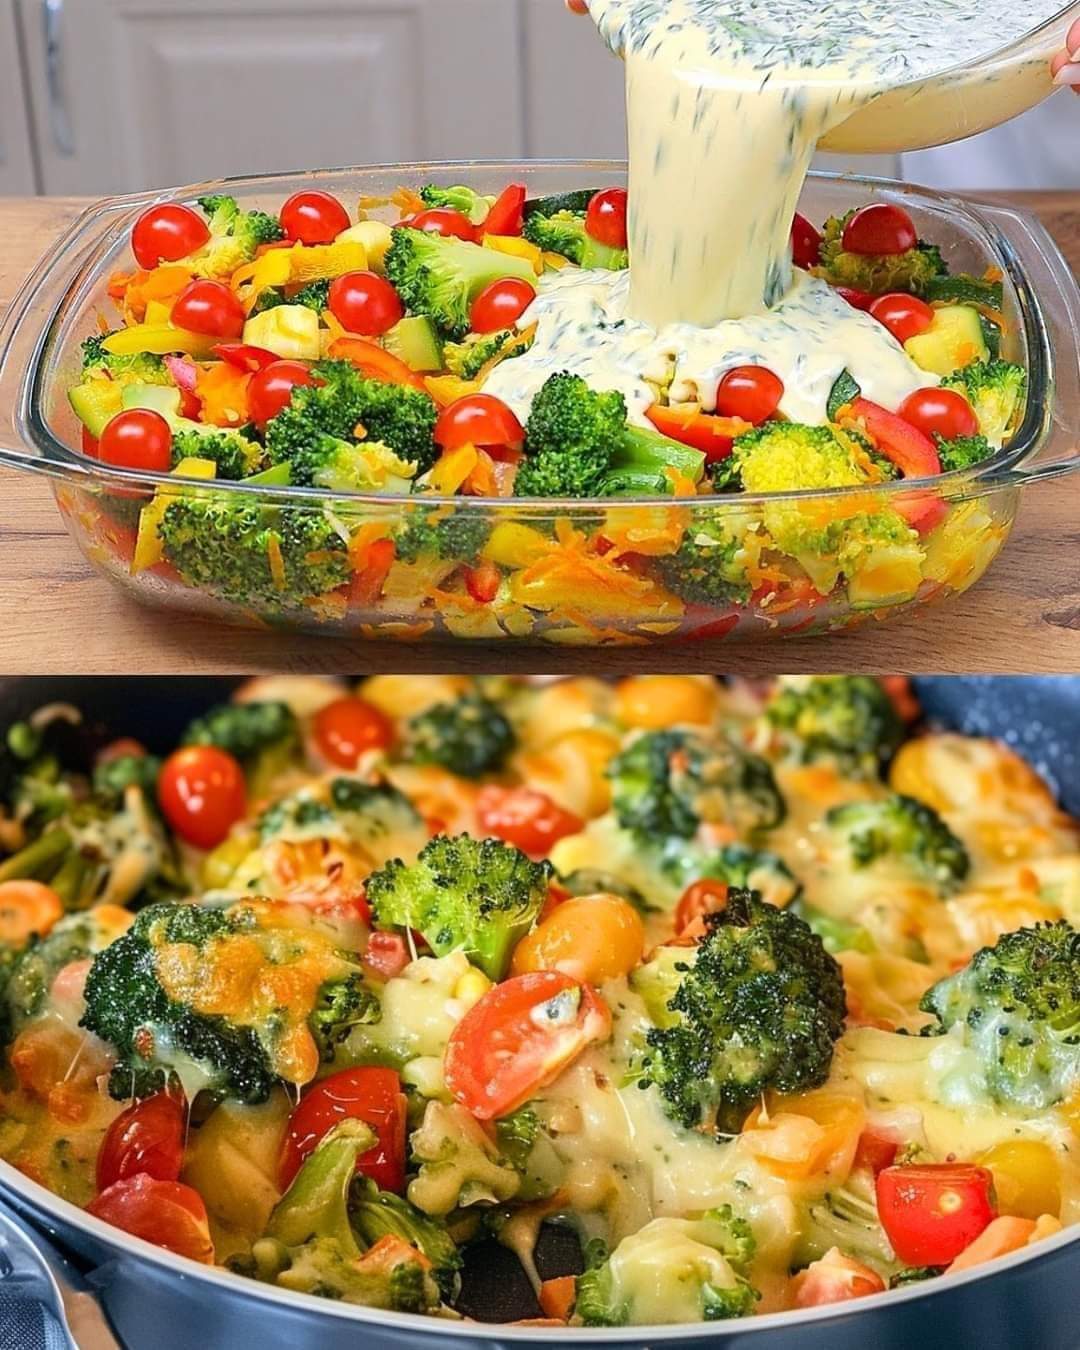 Creamy Baked Broccoli with Tomatoes and Kale